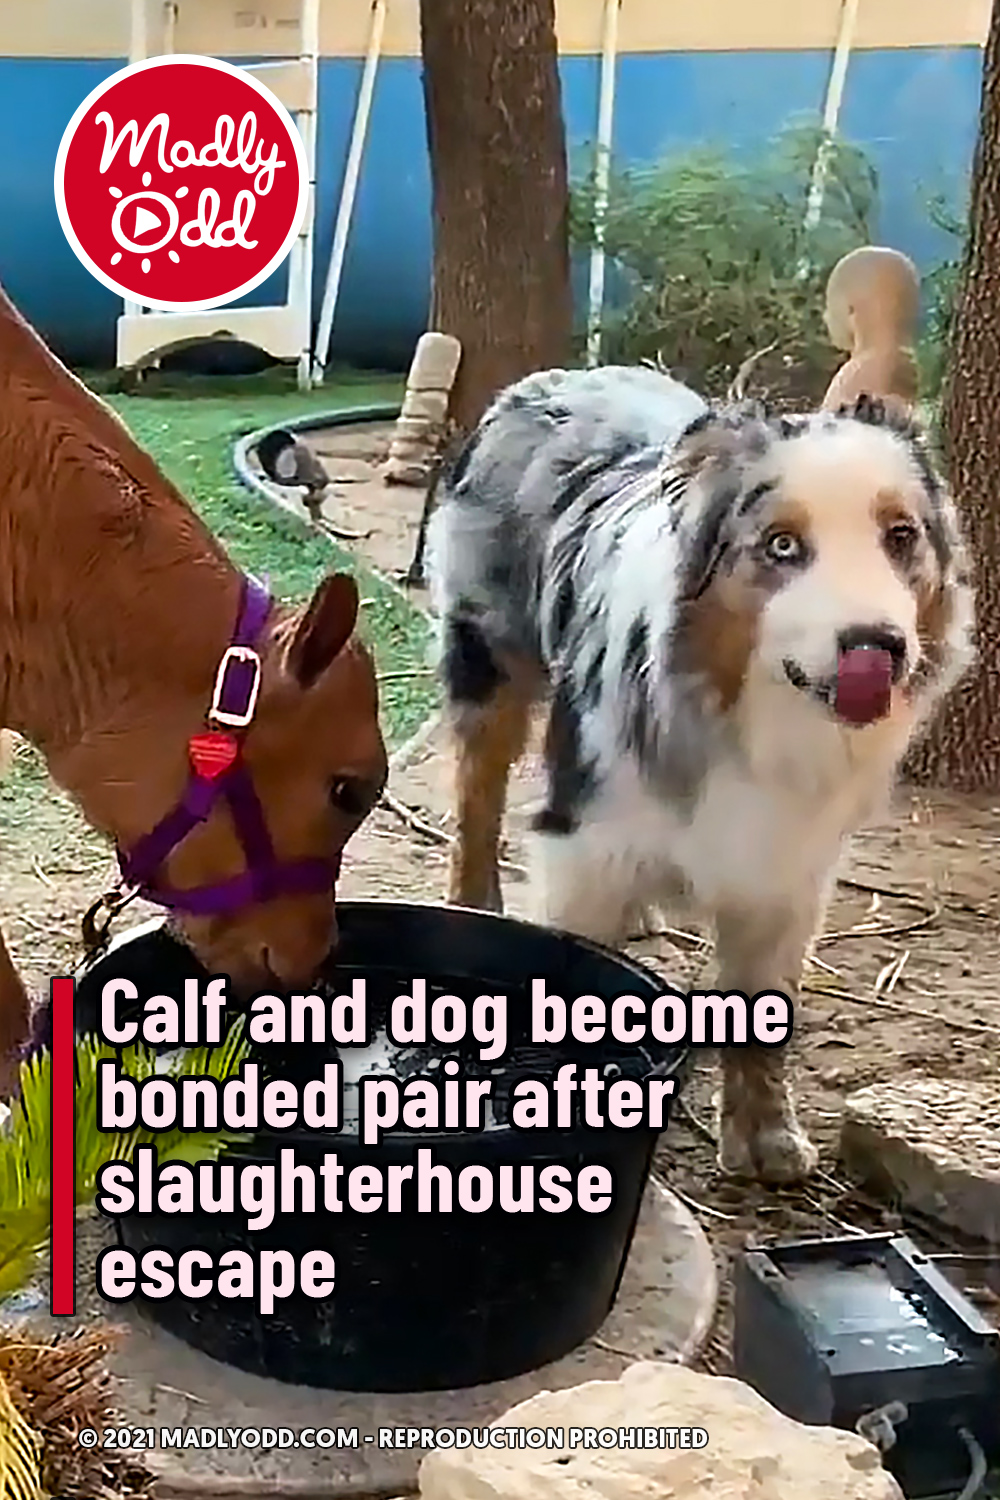 Calf and dog become bonded pair after slaughterhouse escape